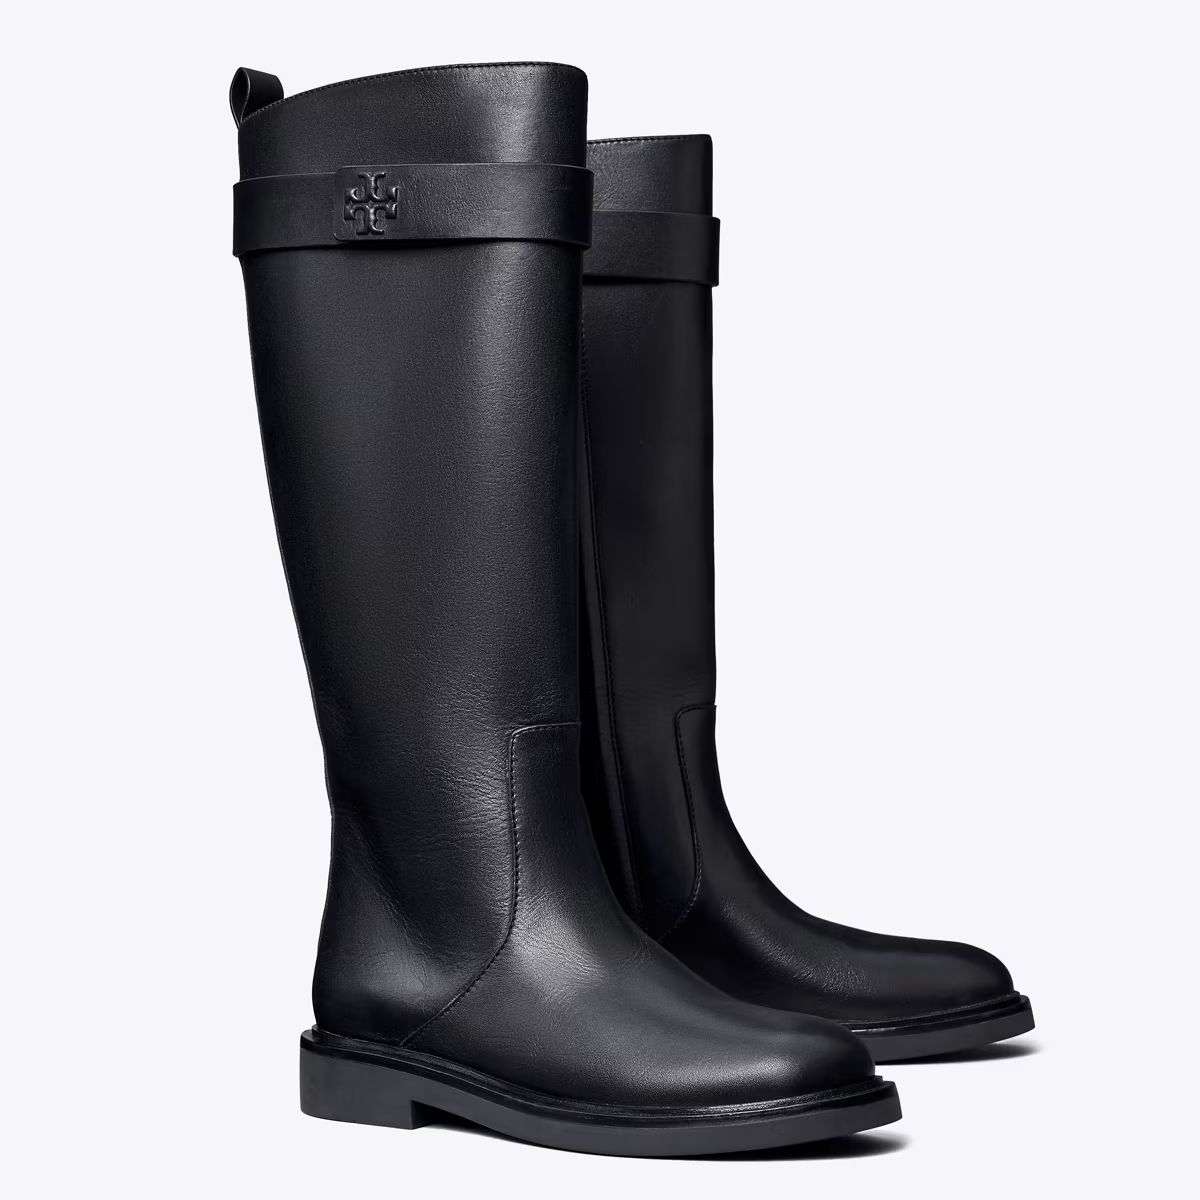 Double T Utility Boot: Women's Designer Boots | Tory Burch | Tory Burch (US)